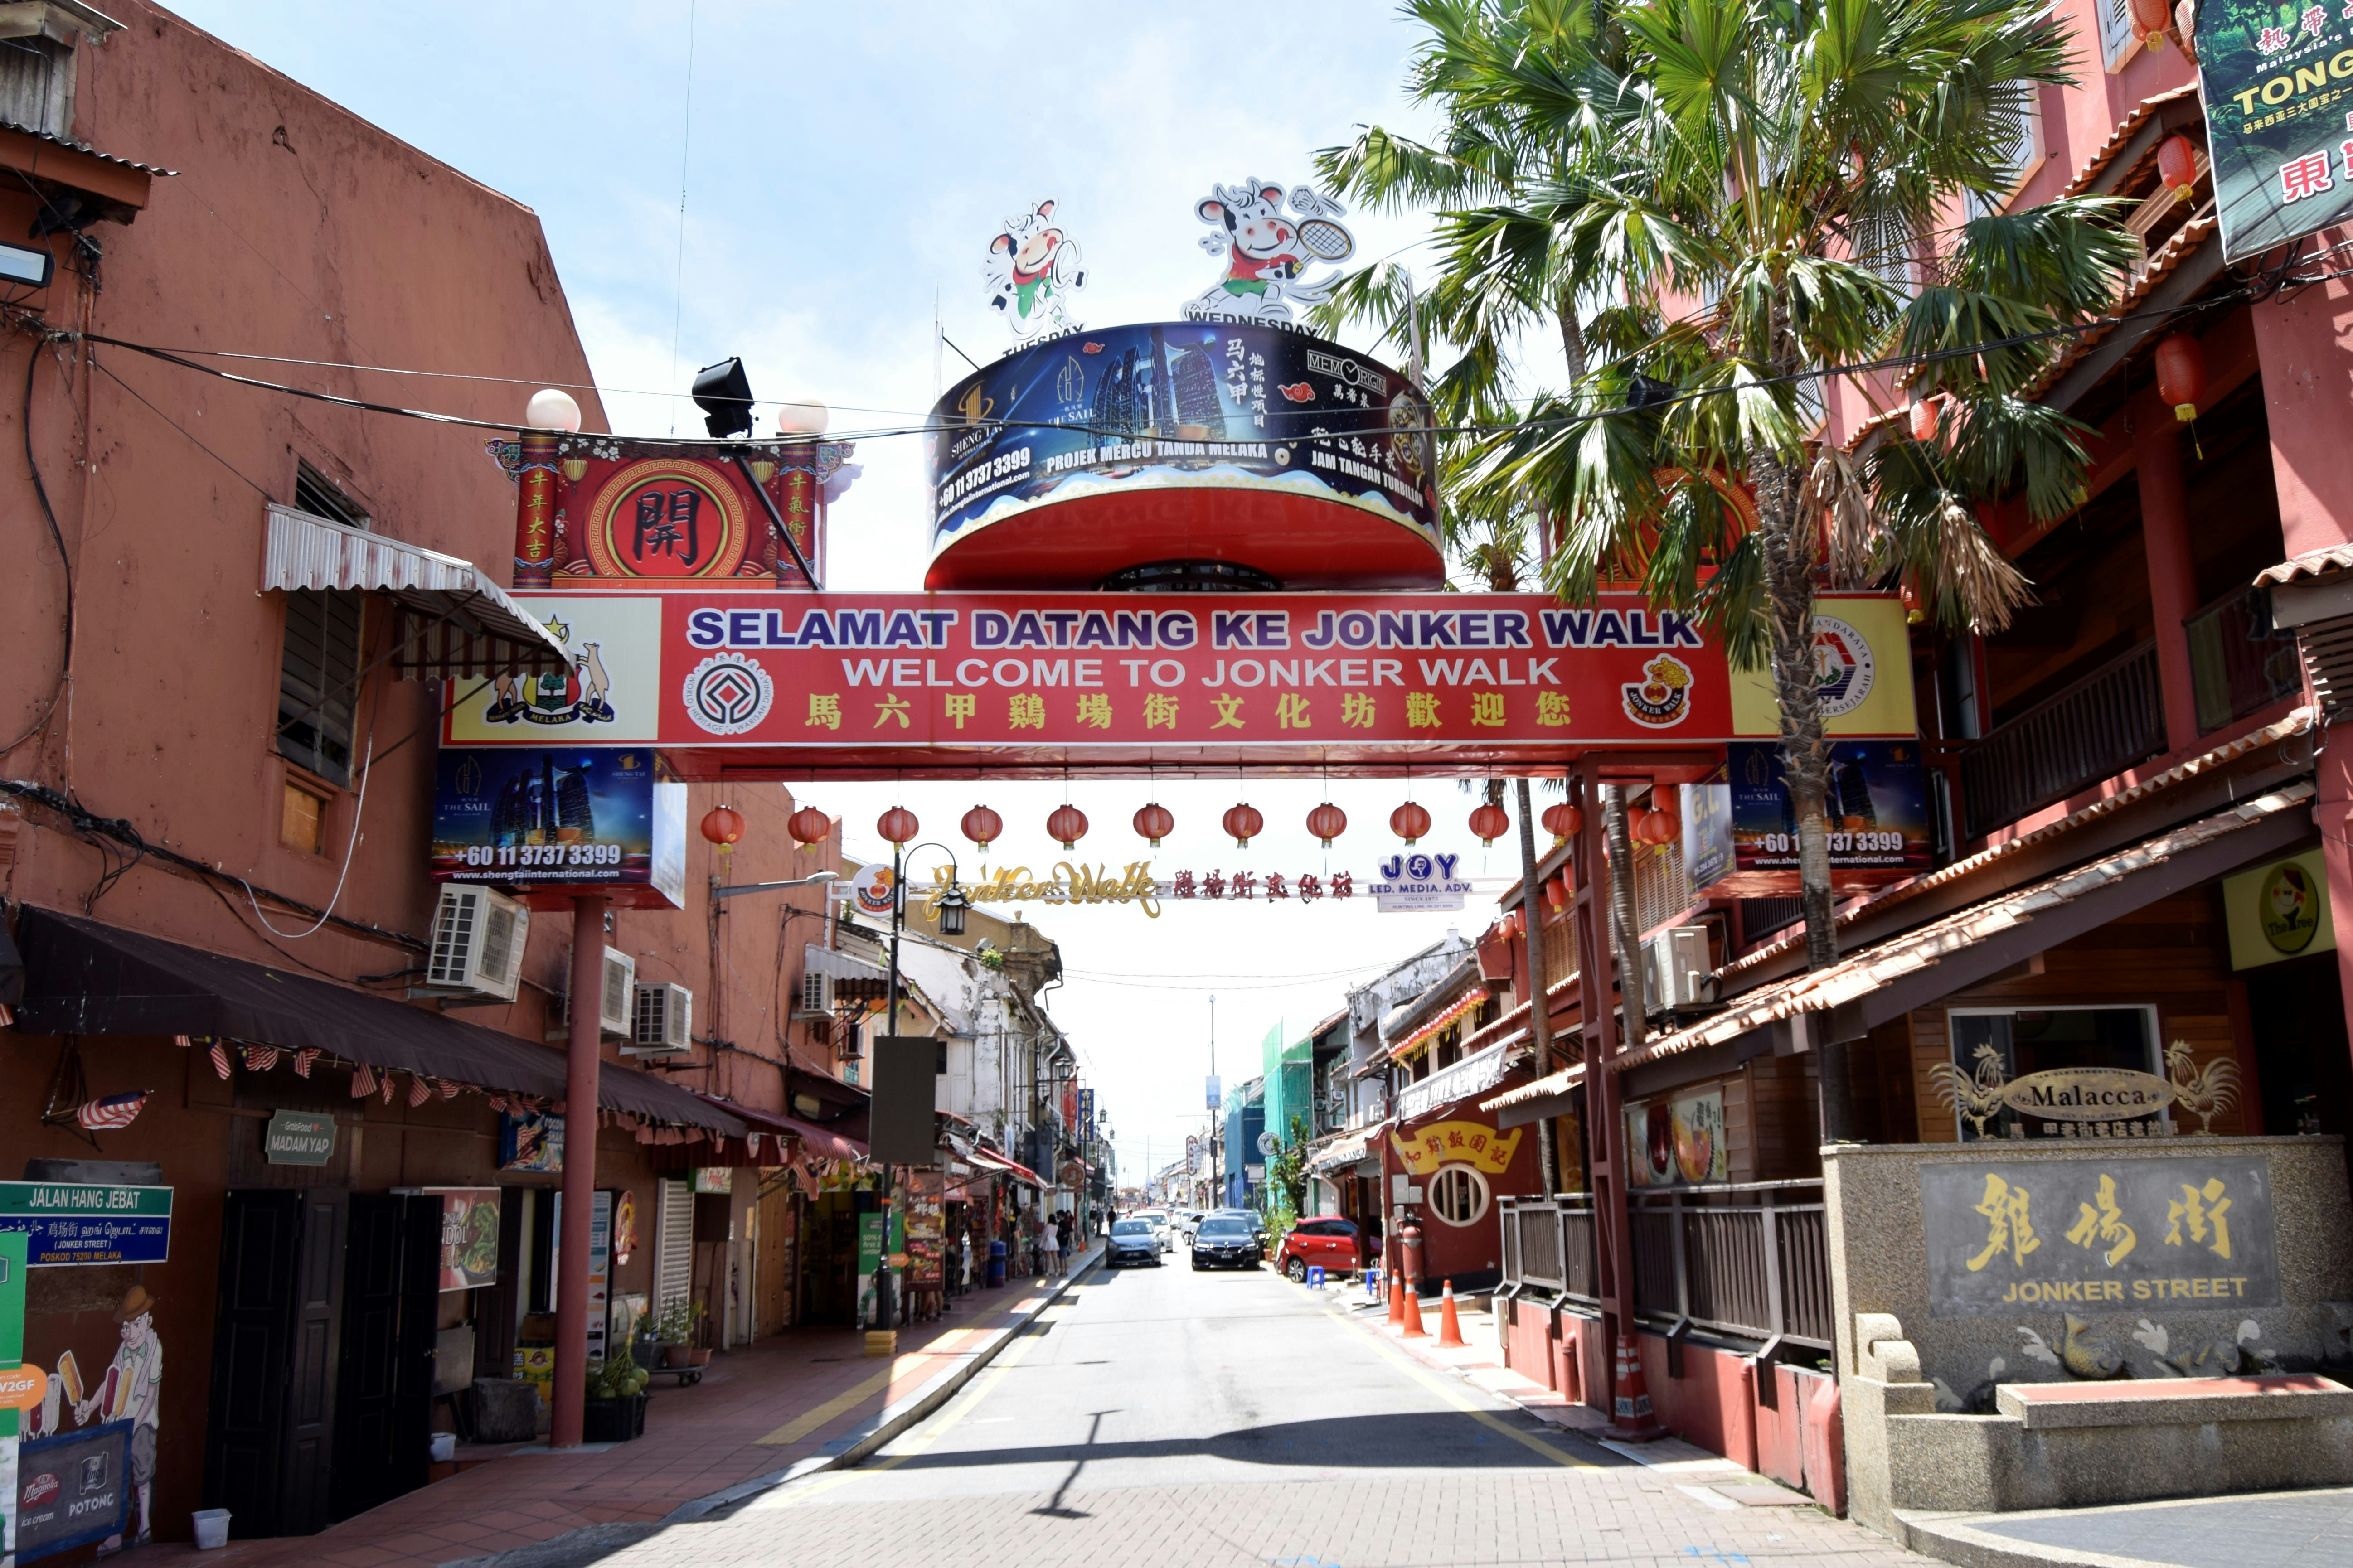 The night market on Friday and Saturday in Melaka Jonker Street is one of the lively places in the city loved by both the locals and the tourists.